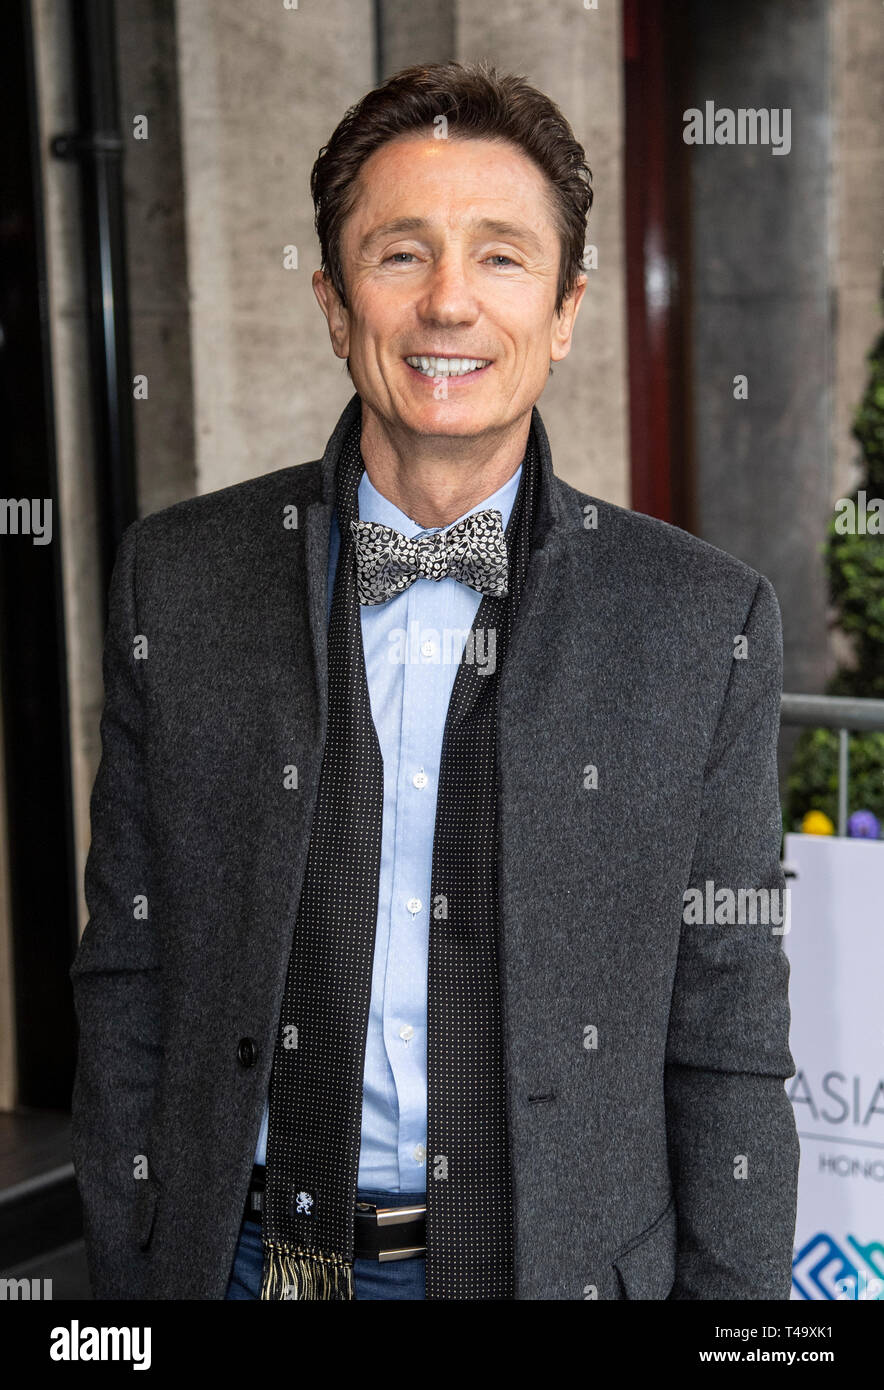 Dominic Keating seen during The Asian Awards 2019 at The Grosvenor House Hotel in London. Stock Photo